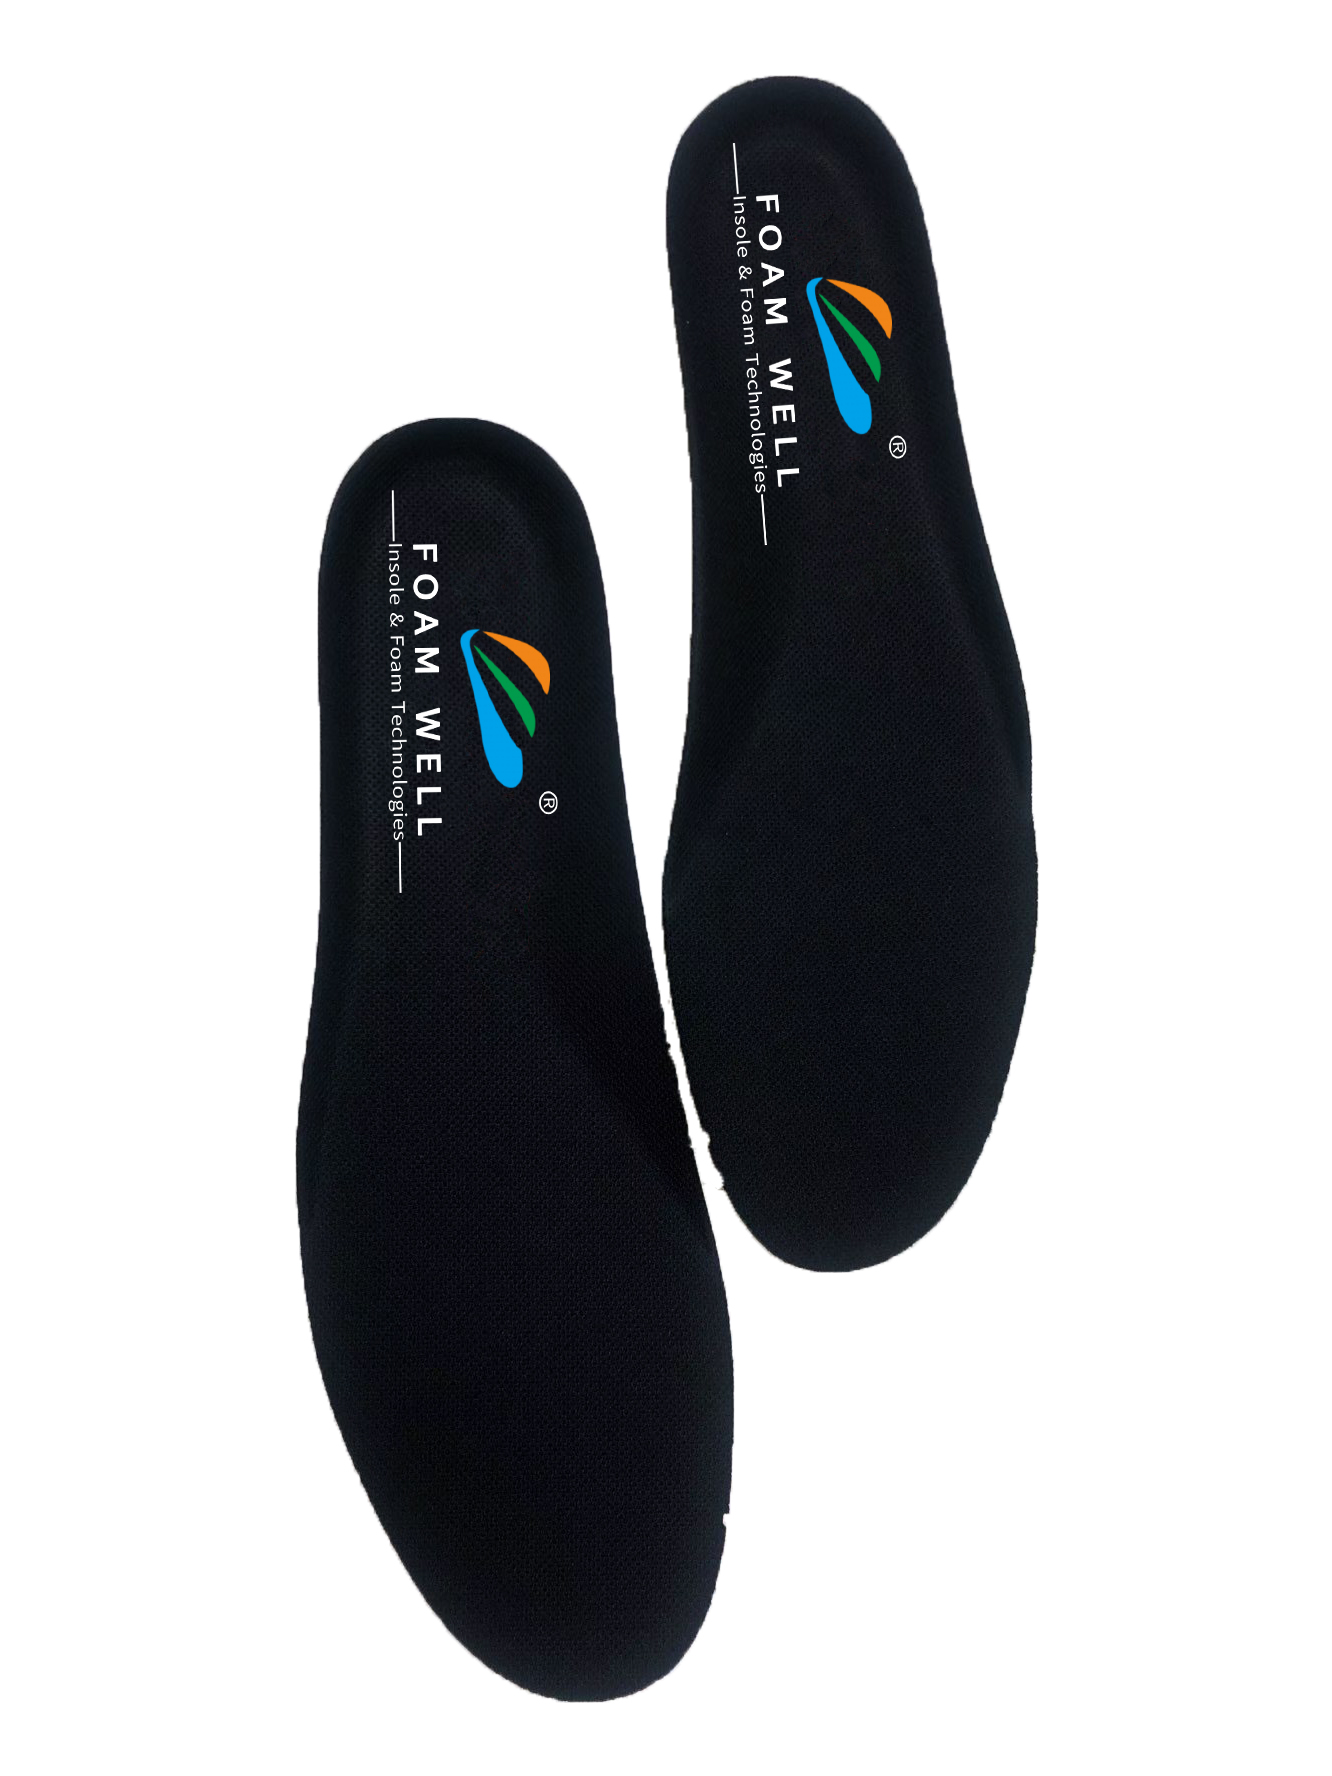 Aerogel Thermal Insulation Insole